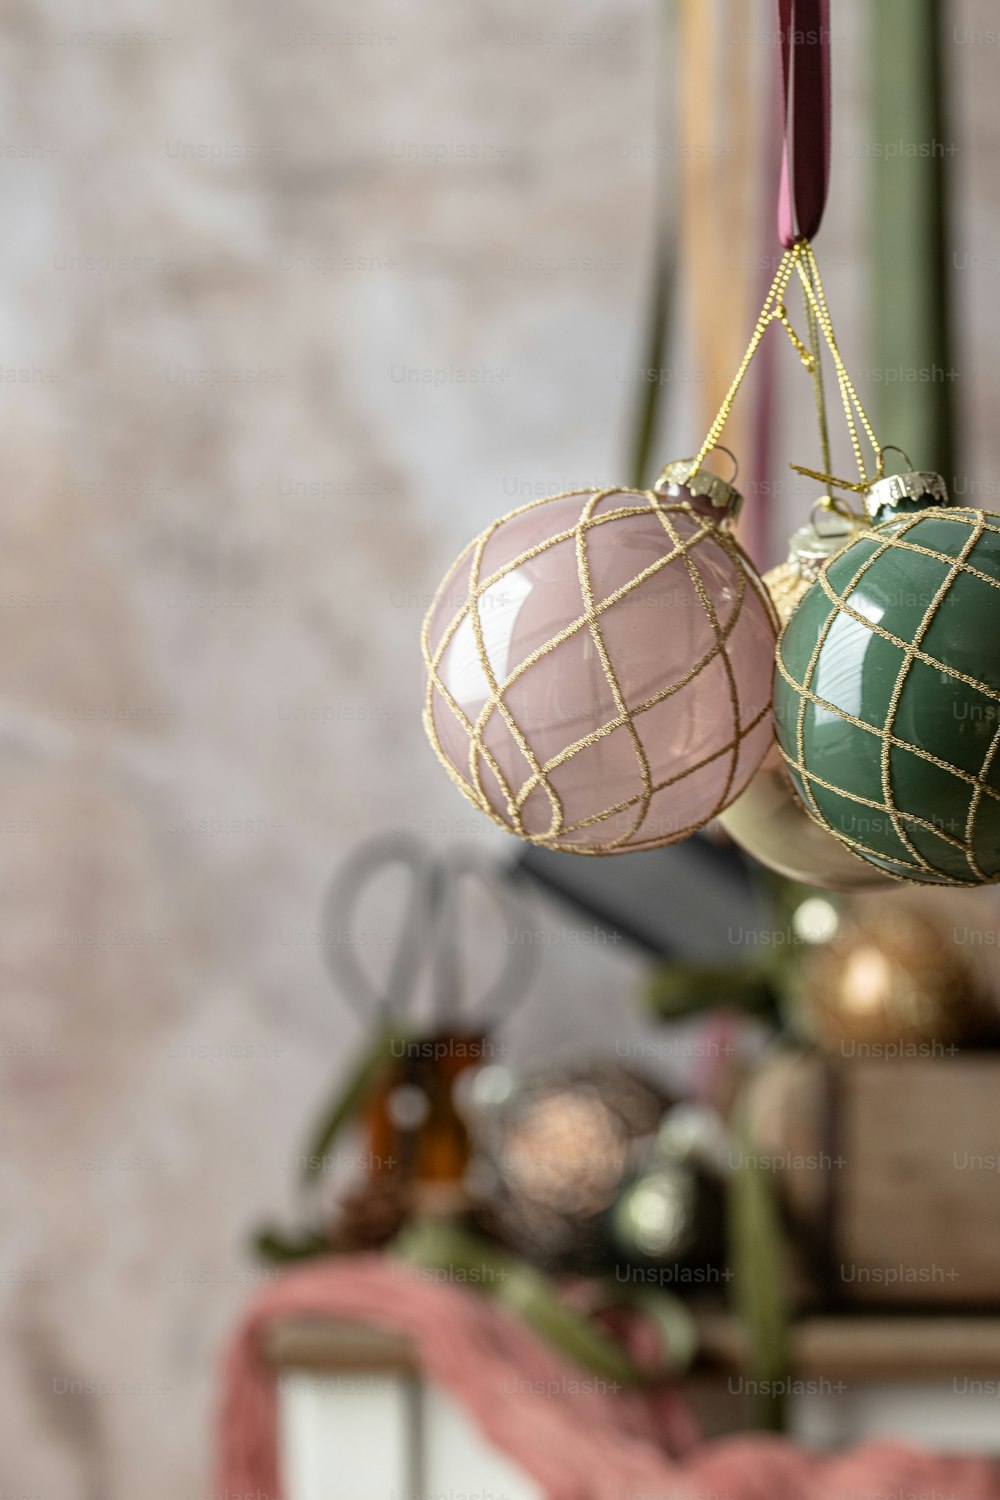 a couple of ornaments hanging from a wire